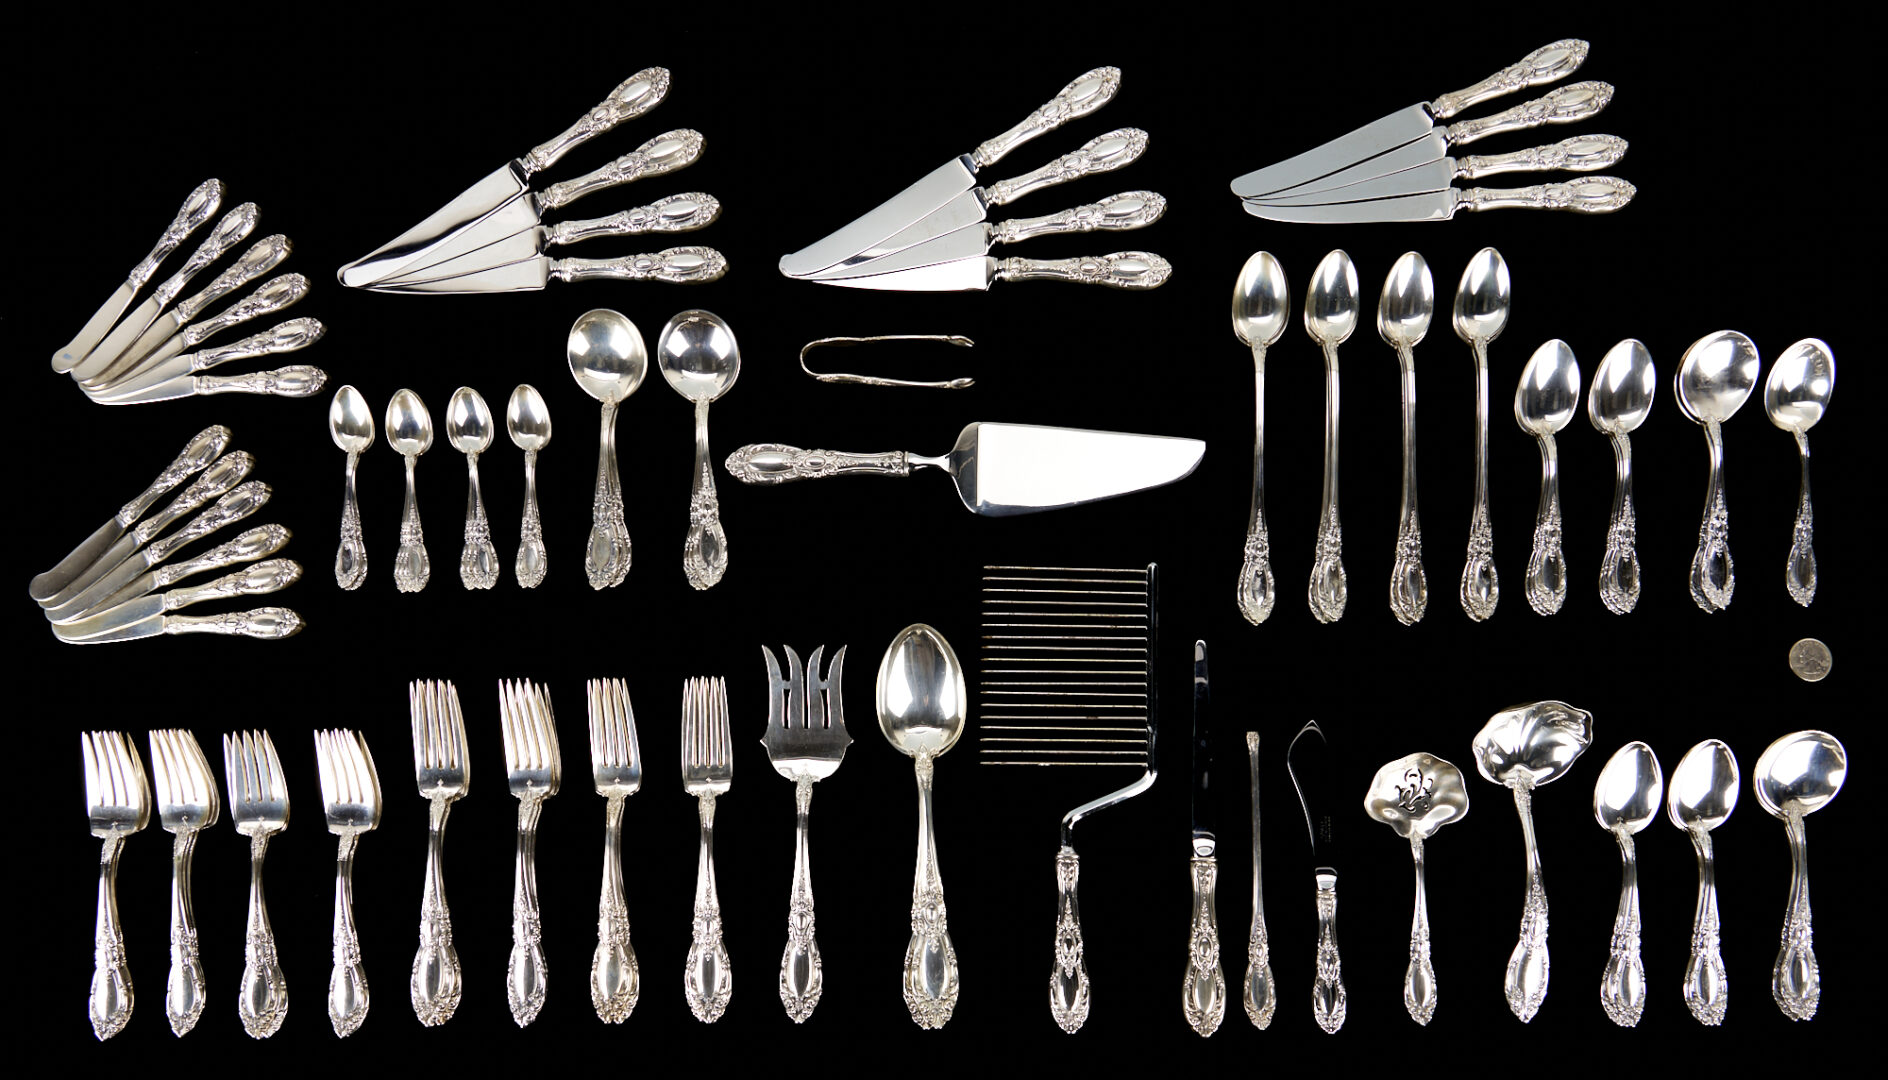 Lot 59: 107 pcs. Towle King Richard Sterling Flatware, Service for 12